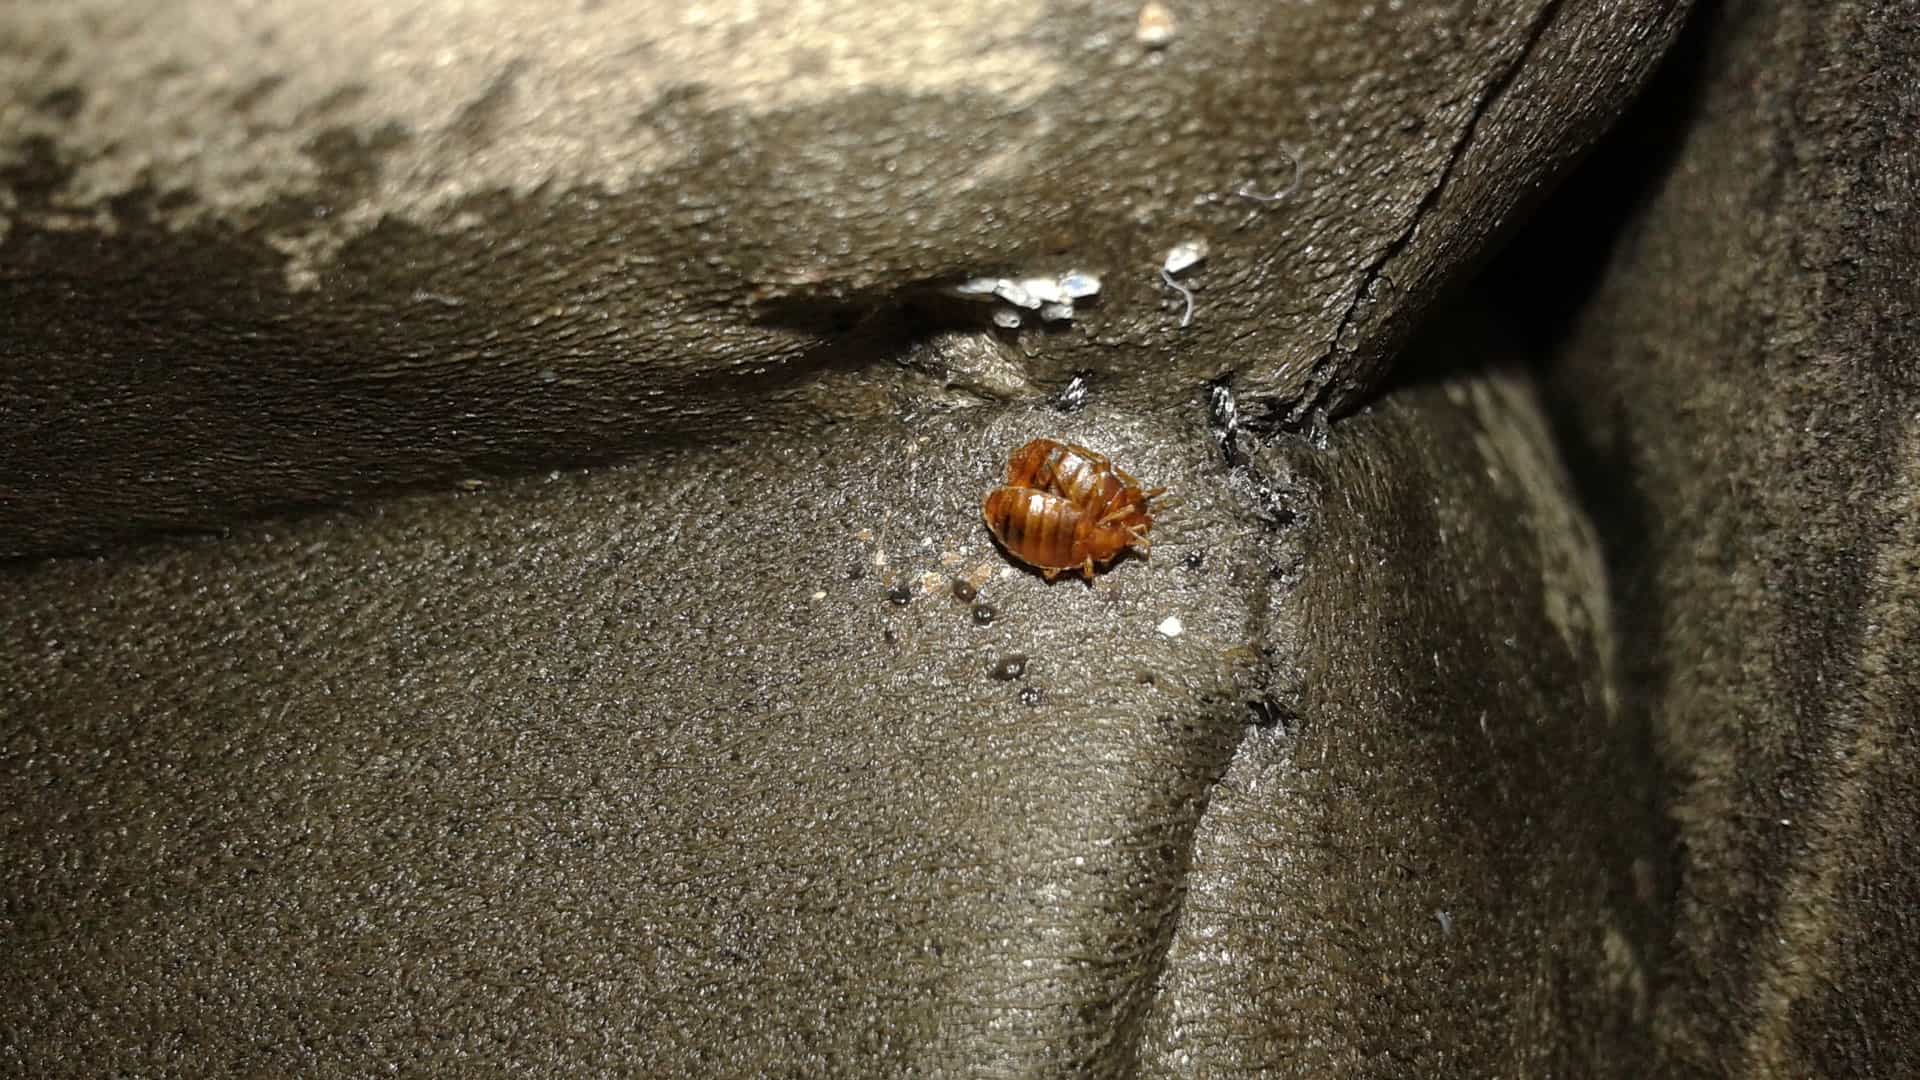 What Do Bed Bugs Look Like Over 50 Pictures Debedbug